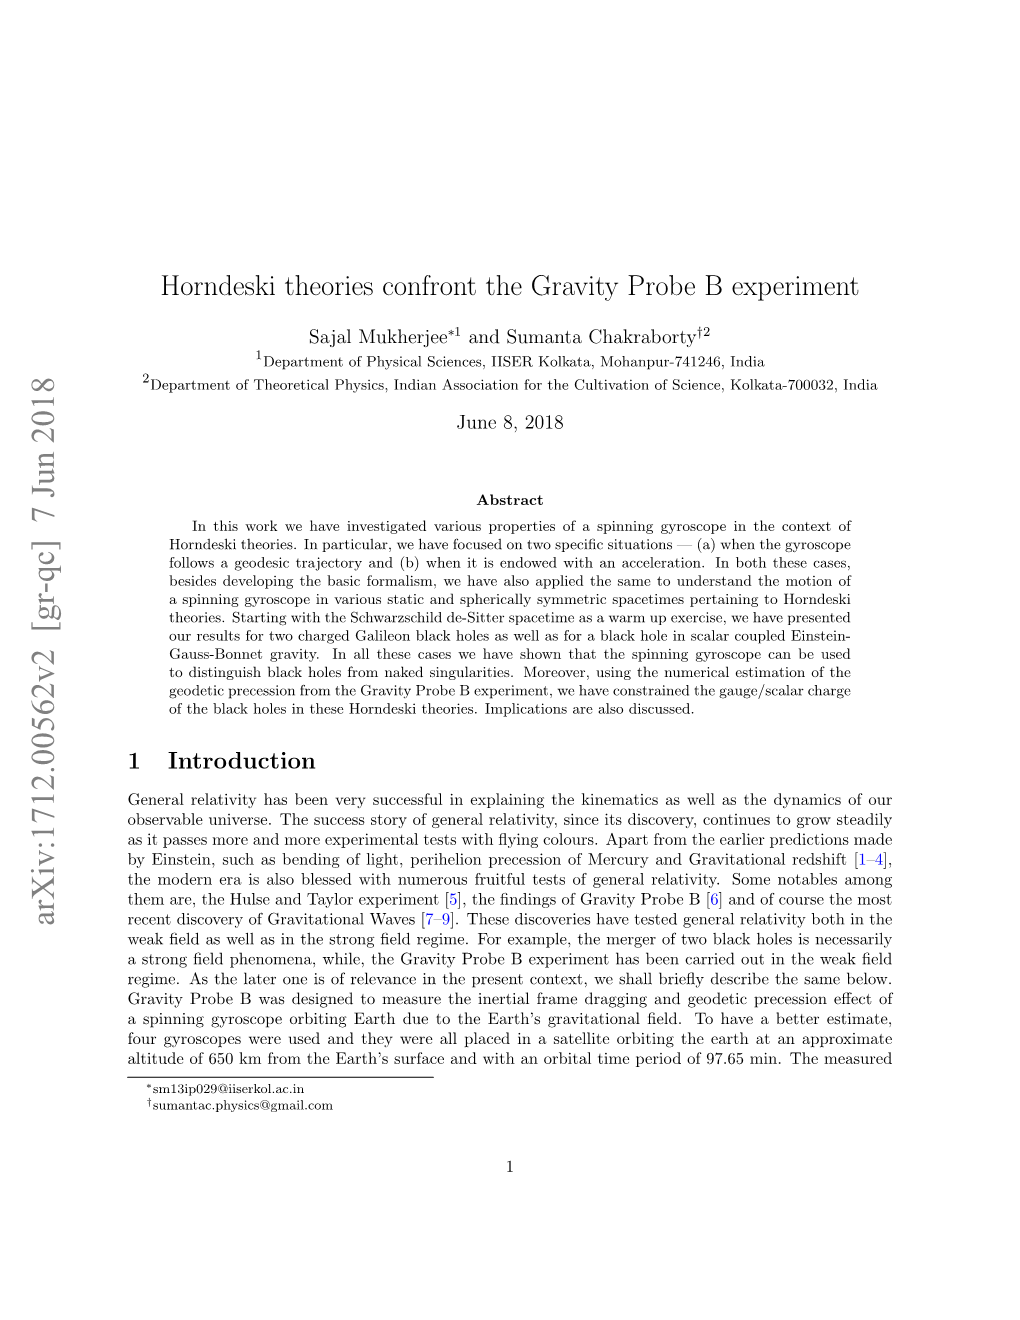 Horndeski Theories Confront the Gravity Probe B Experiment